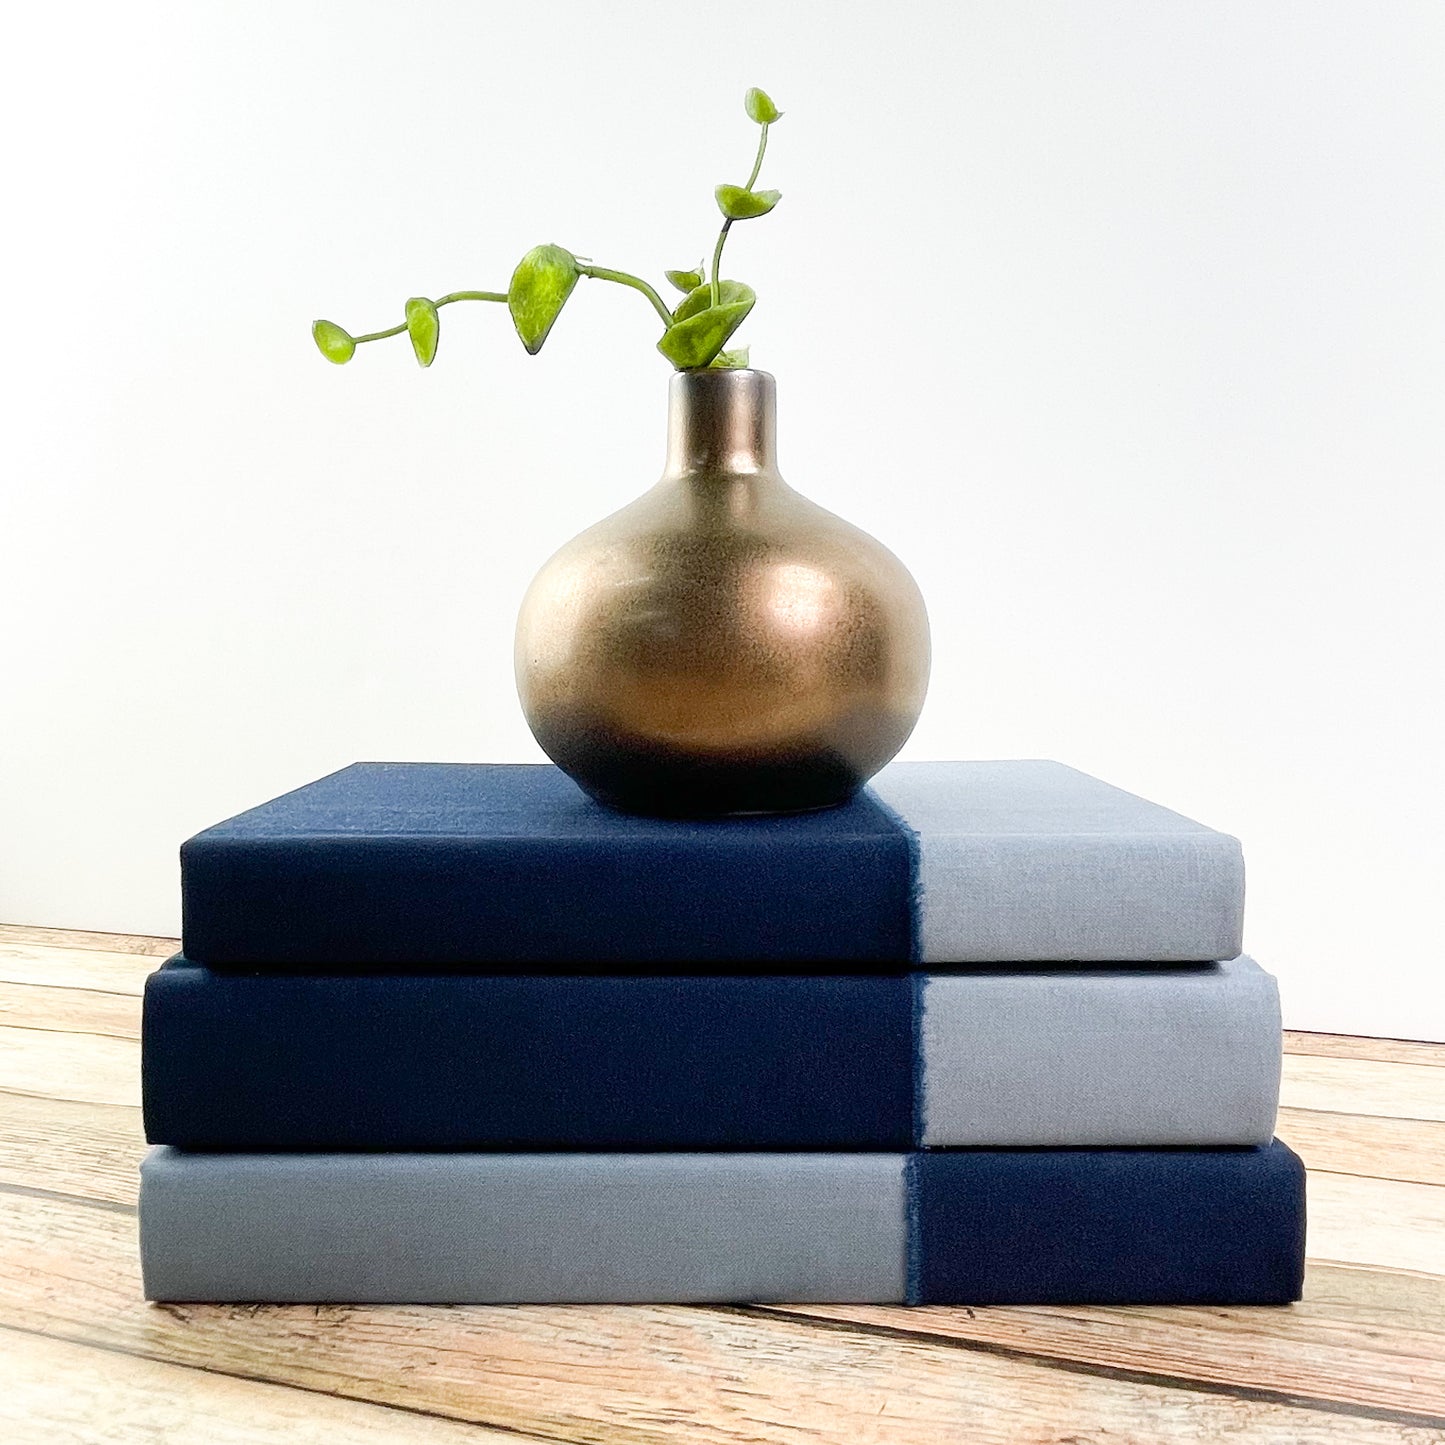 Shades of Blue Books for Decor